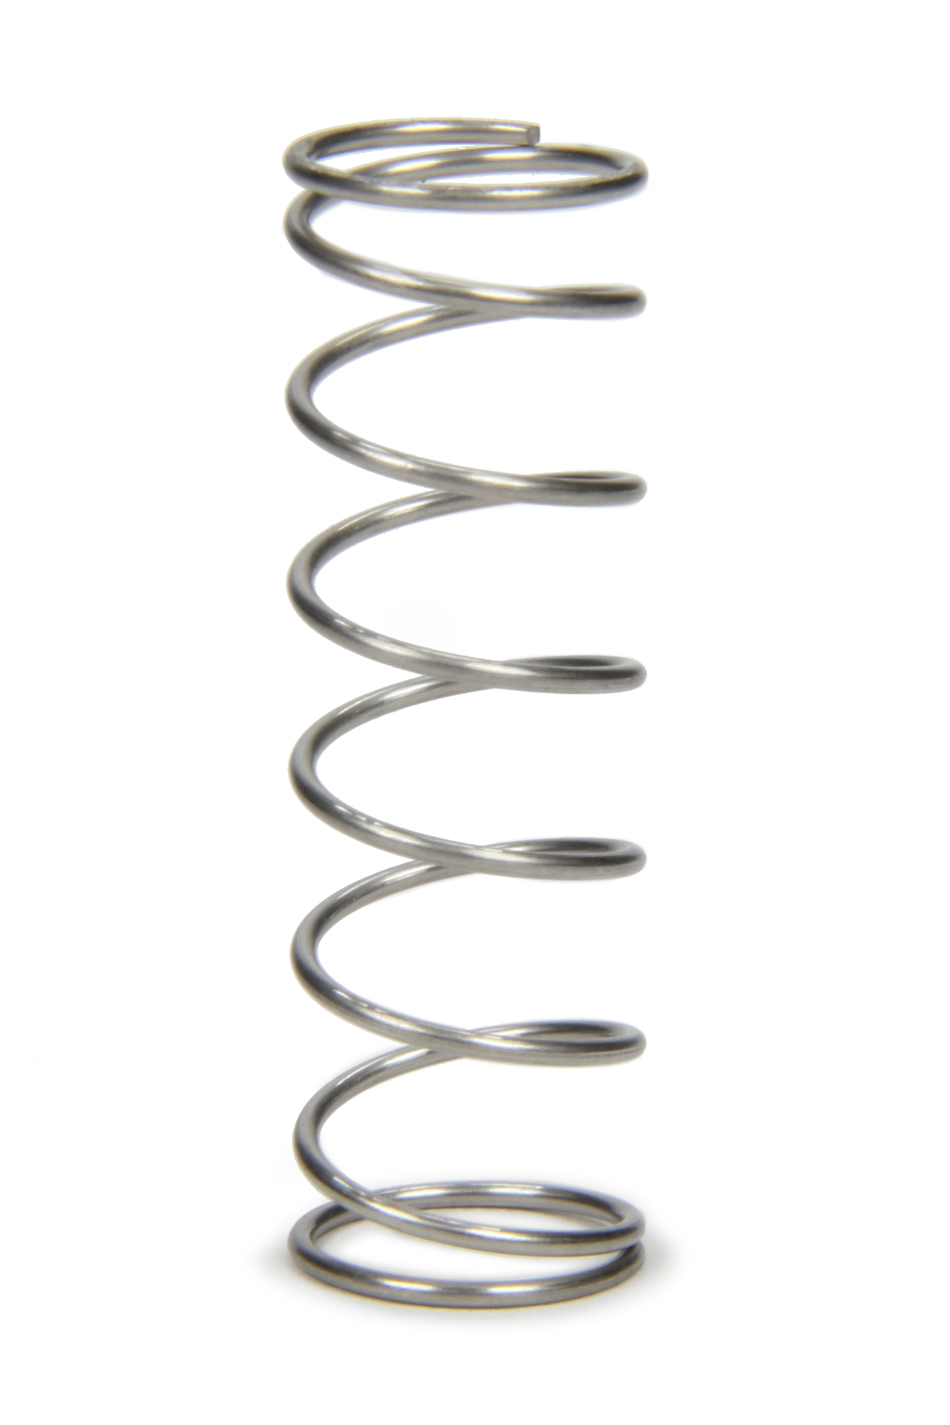 Conroy Bleeders CPC-023 Tire Bleeder Spring, 8 to 15 psi, Stainless, Silver Paint, Conroy Diaphragm Bleeder, Each